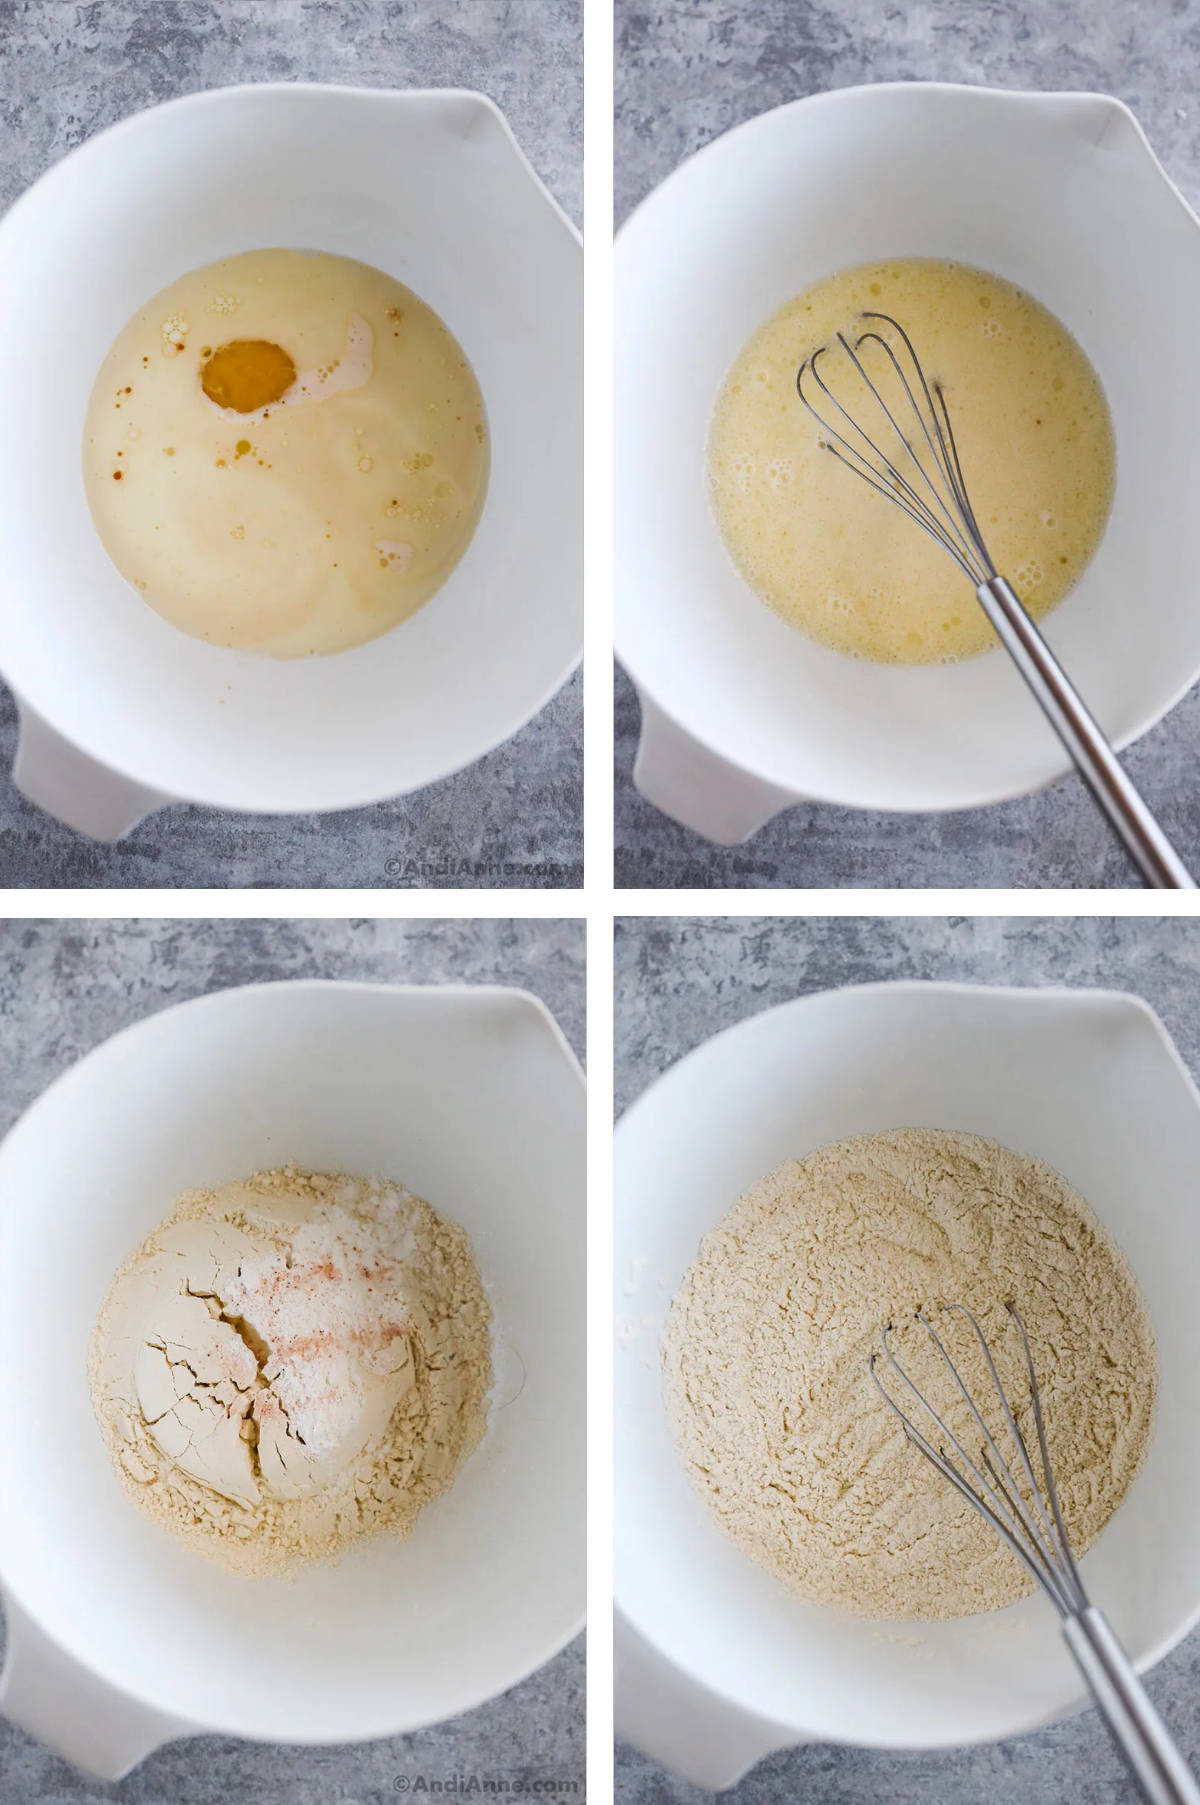 Four images in one: 1. large egg, vegetable oil, milk and vanilla extract in a white bowl. 2. Ingredients are mixed. 3. All-purpose flour, baking powder, granulated sugar and salt in a white bowl. 4. Ingredients are mixed.